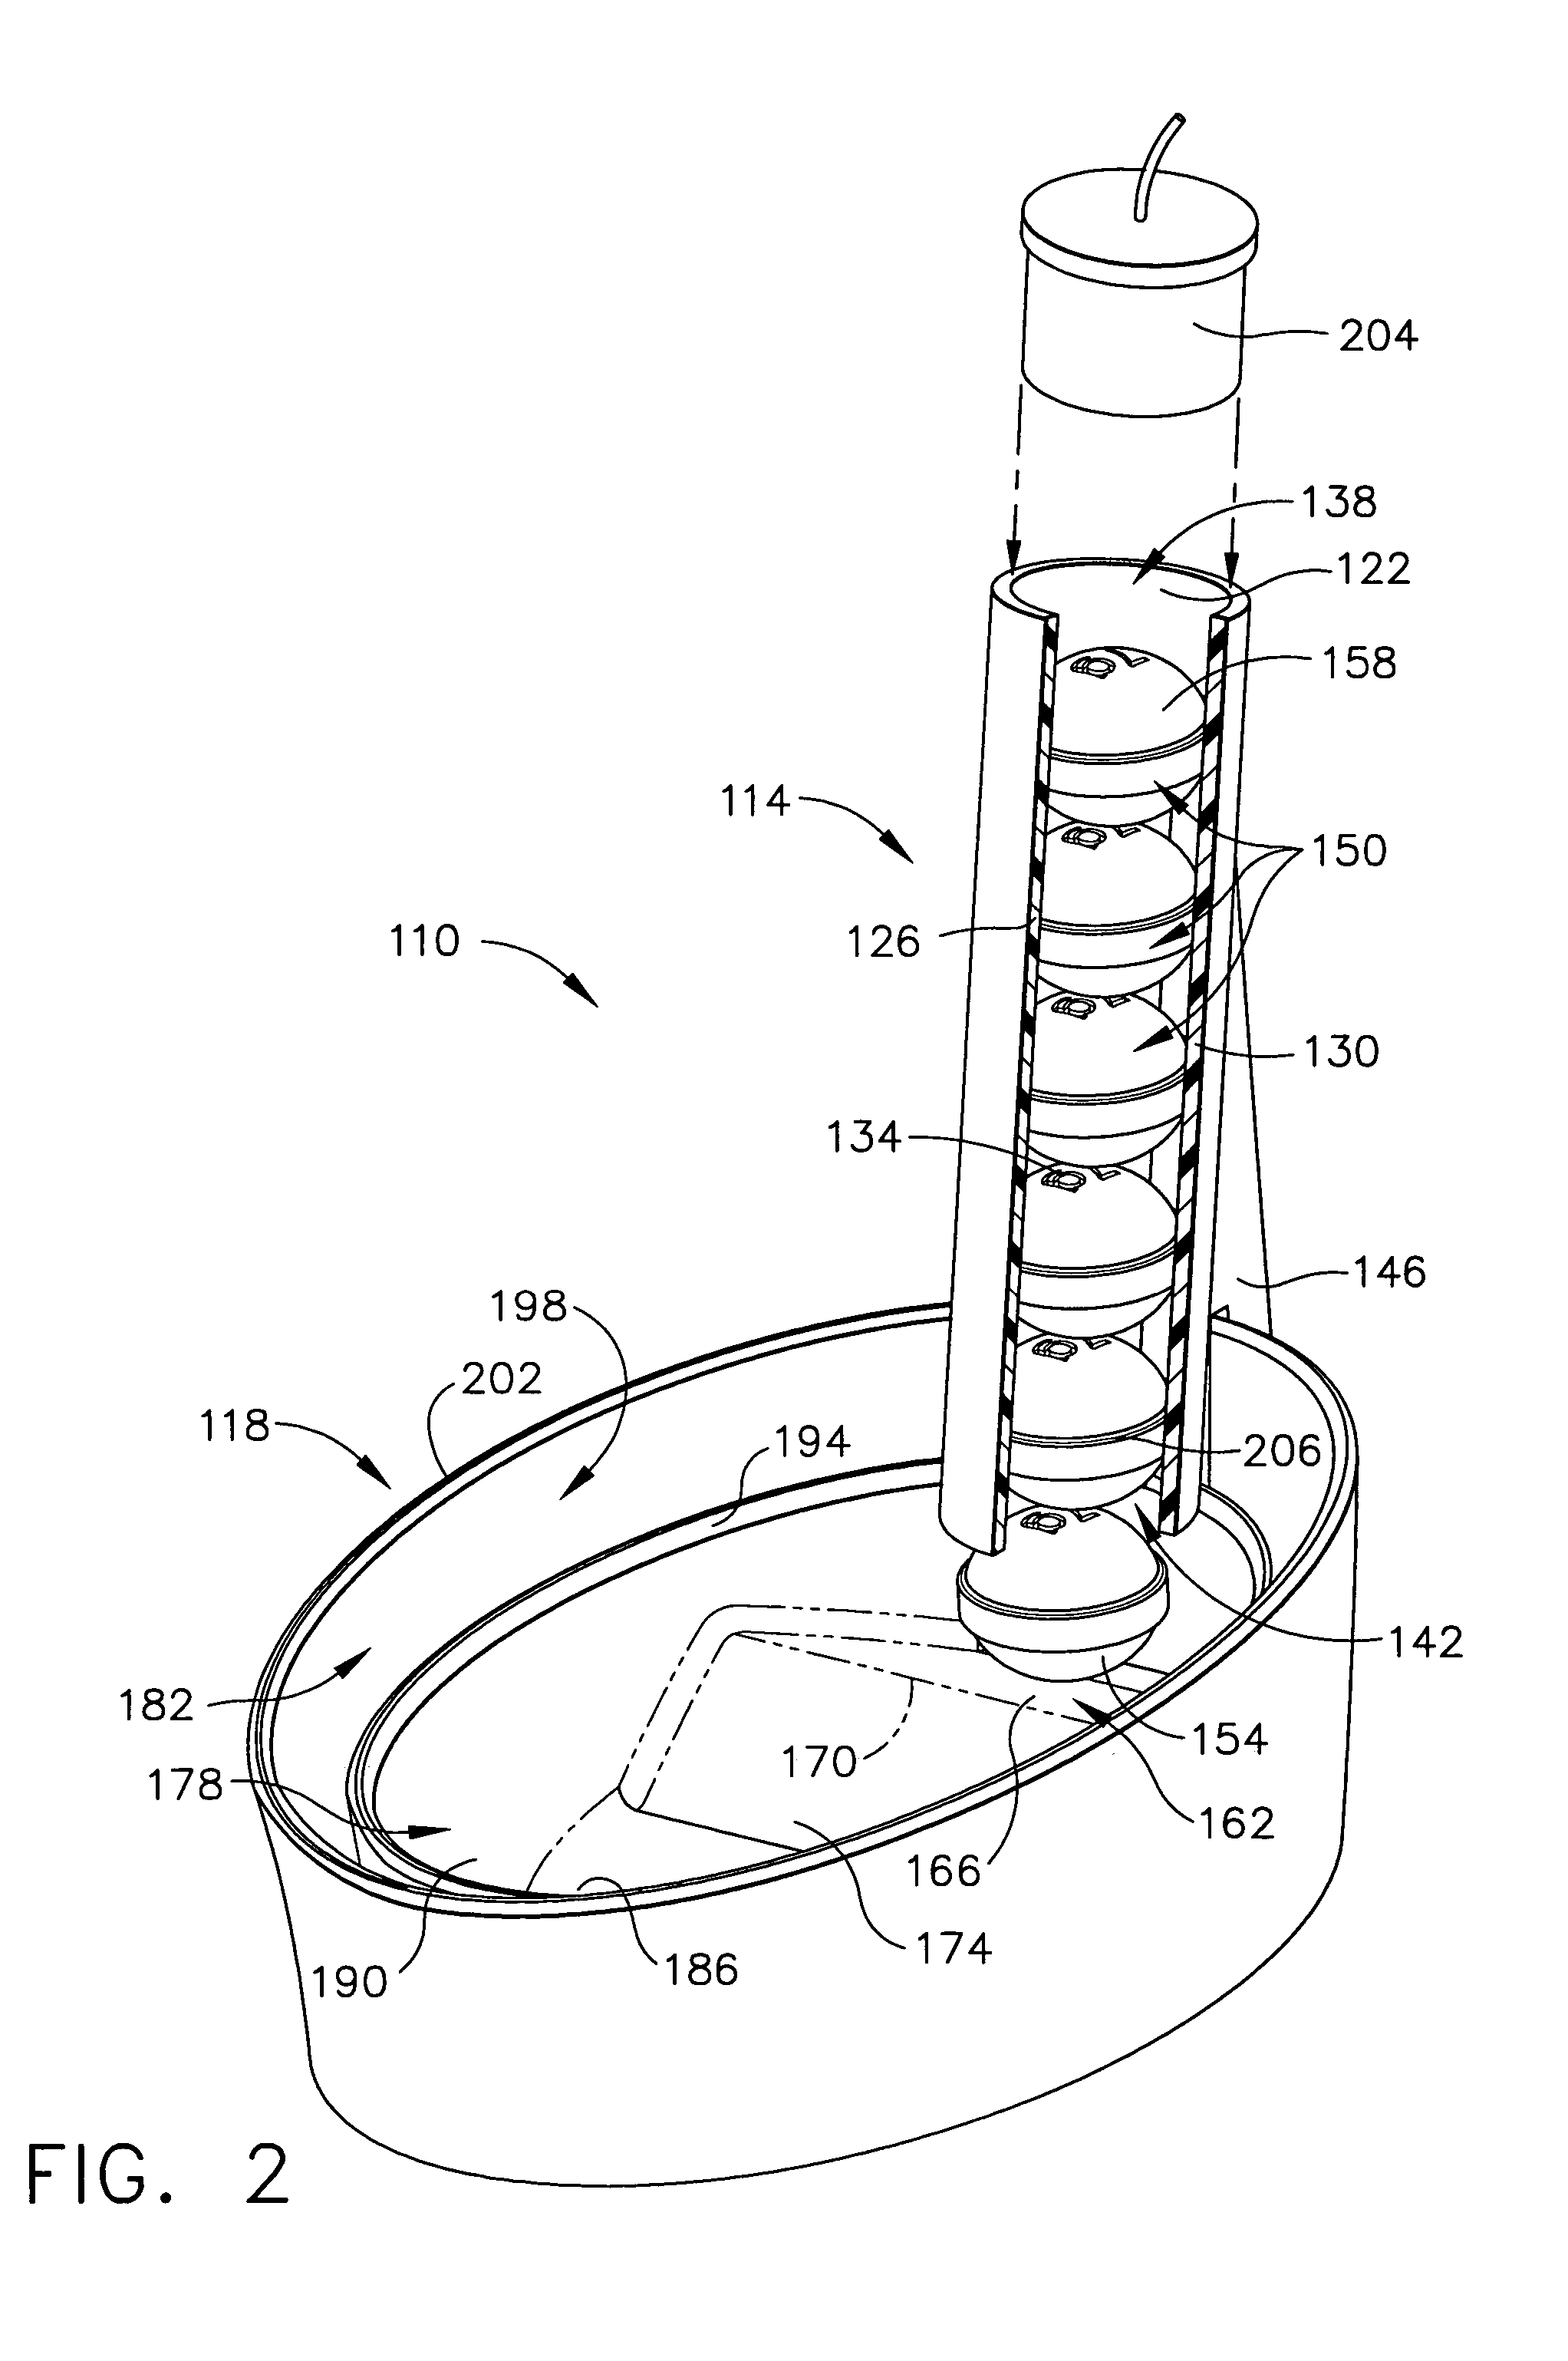 Dispensing systems, dispensers and methods for sustained, incremental release of fragrance